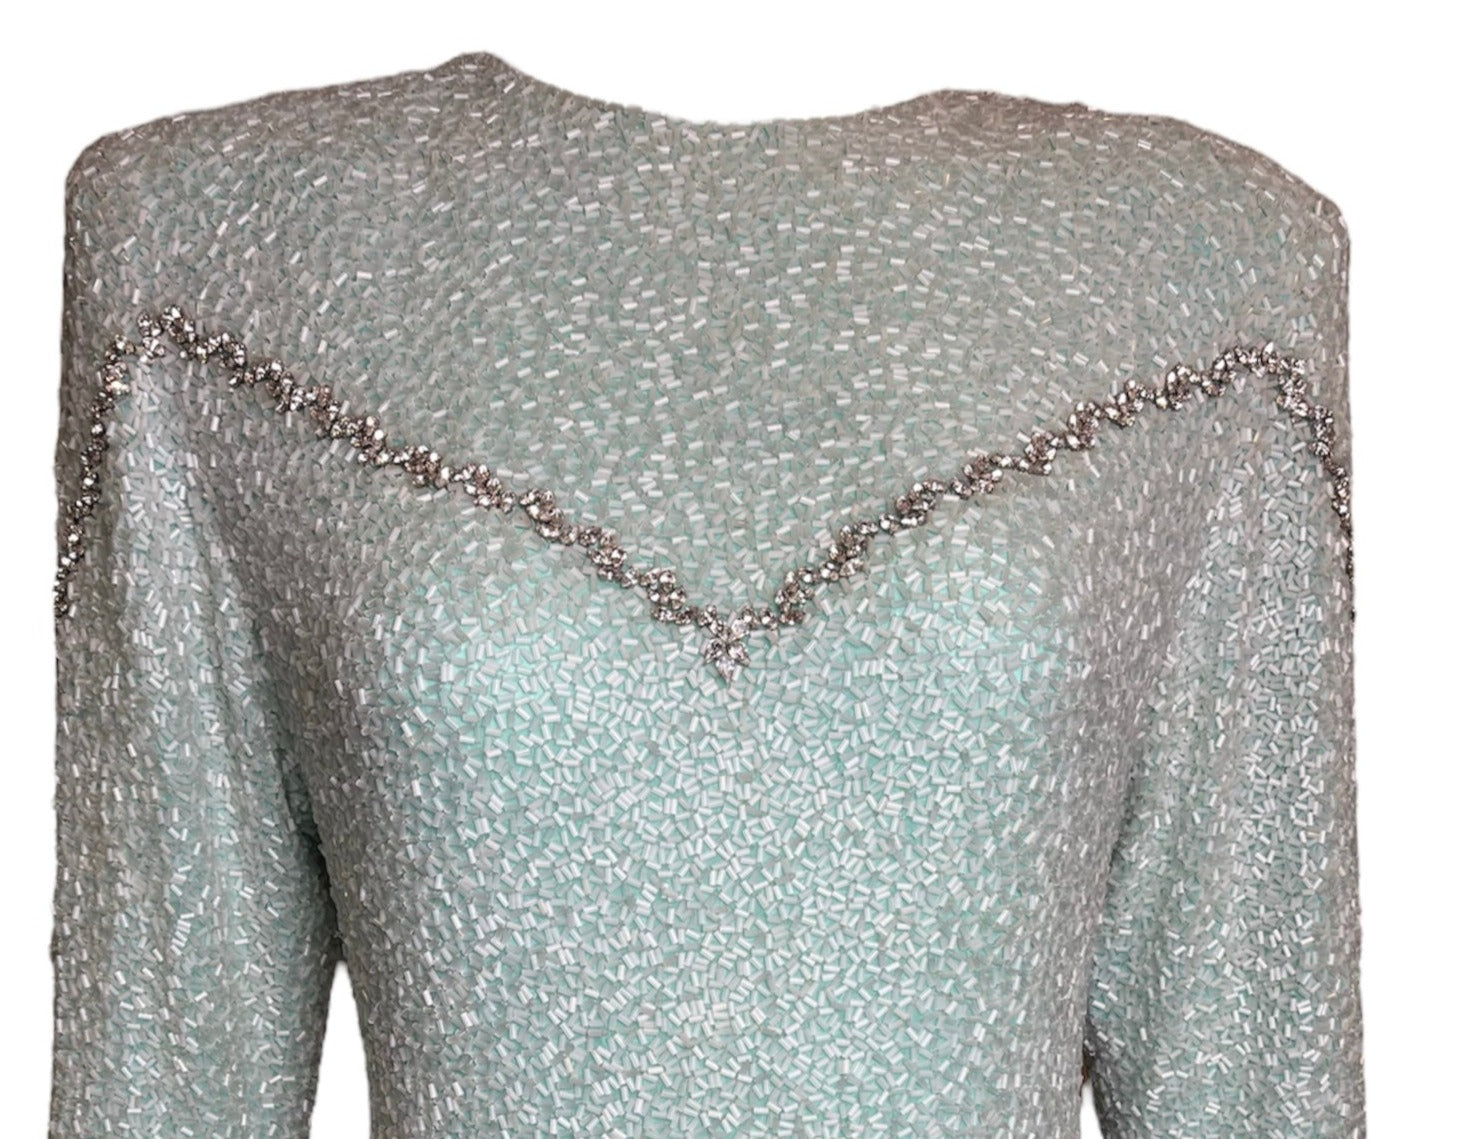 Galanos 80s Heavily Embellished Seafoam Green Gown, bodice